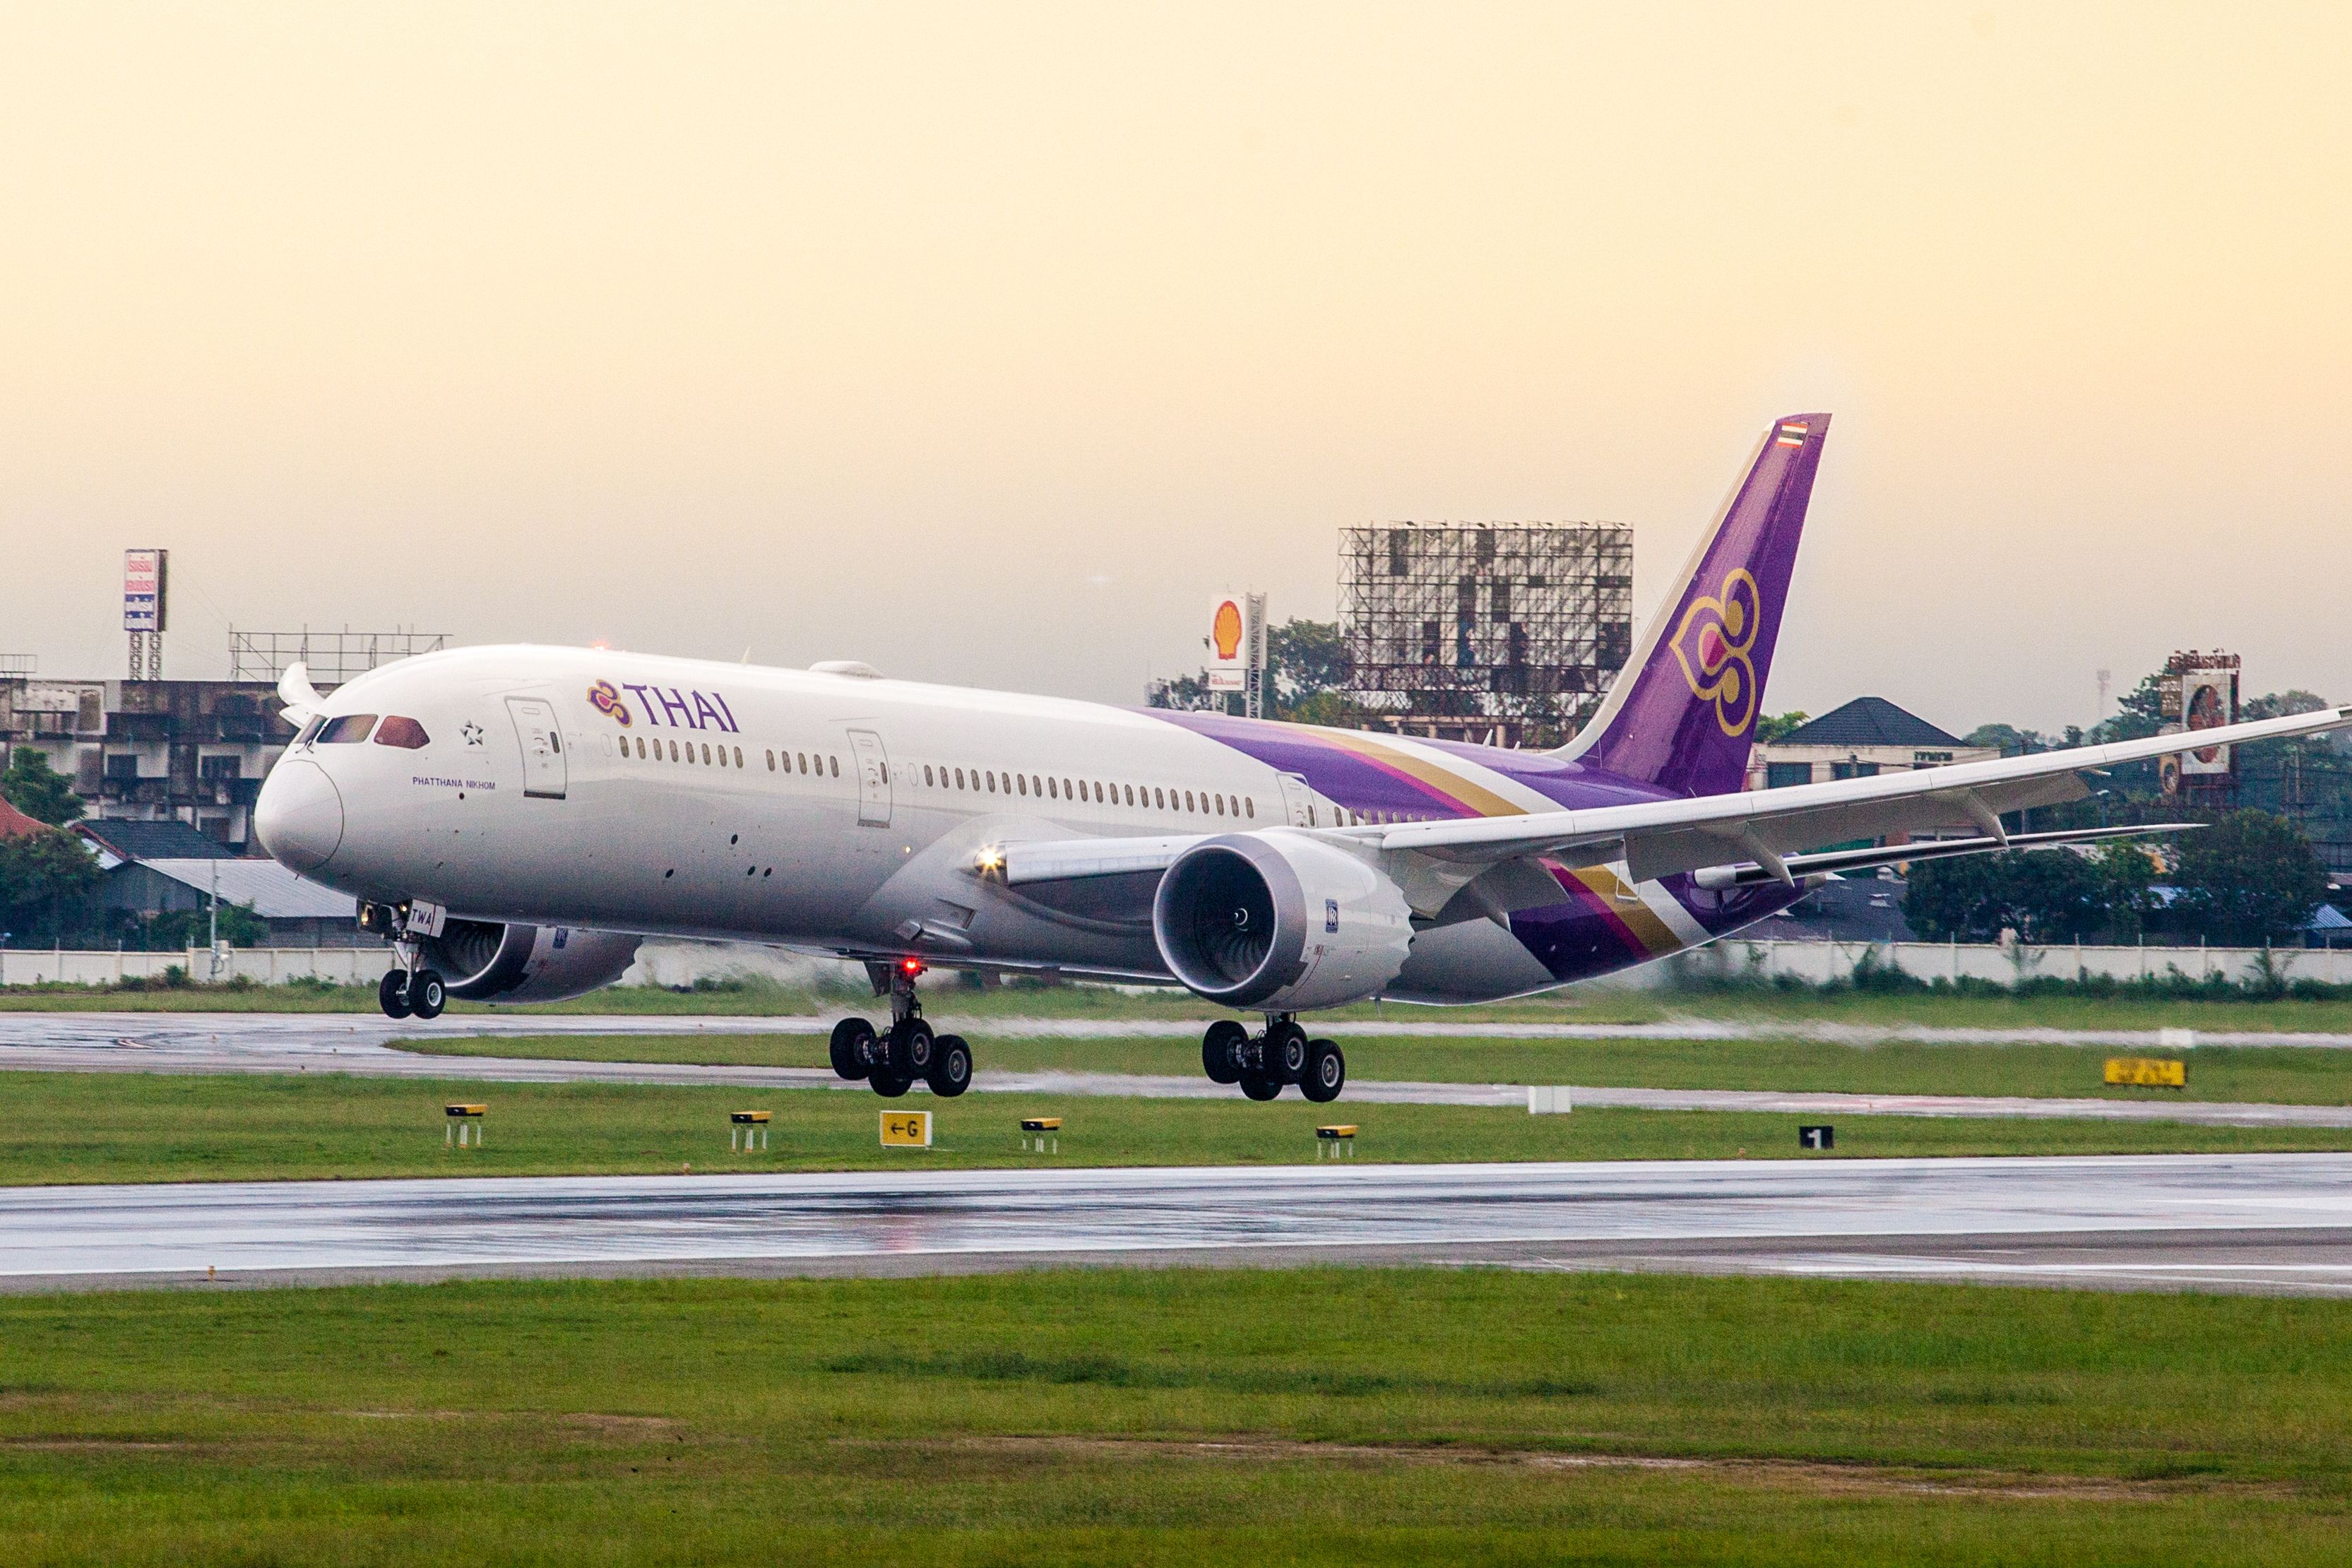 Boeing 787-9 Dreamliner of Thai airways which opearated on flight TG110 from Bangkok to Chaing Mai